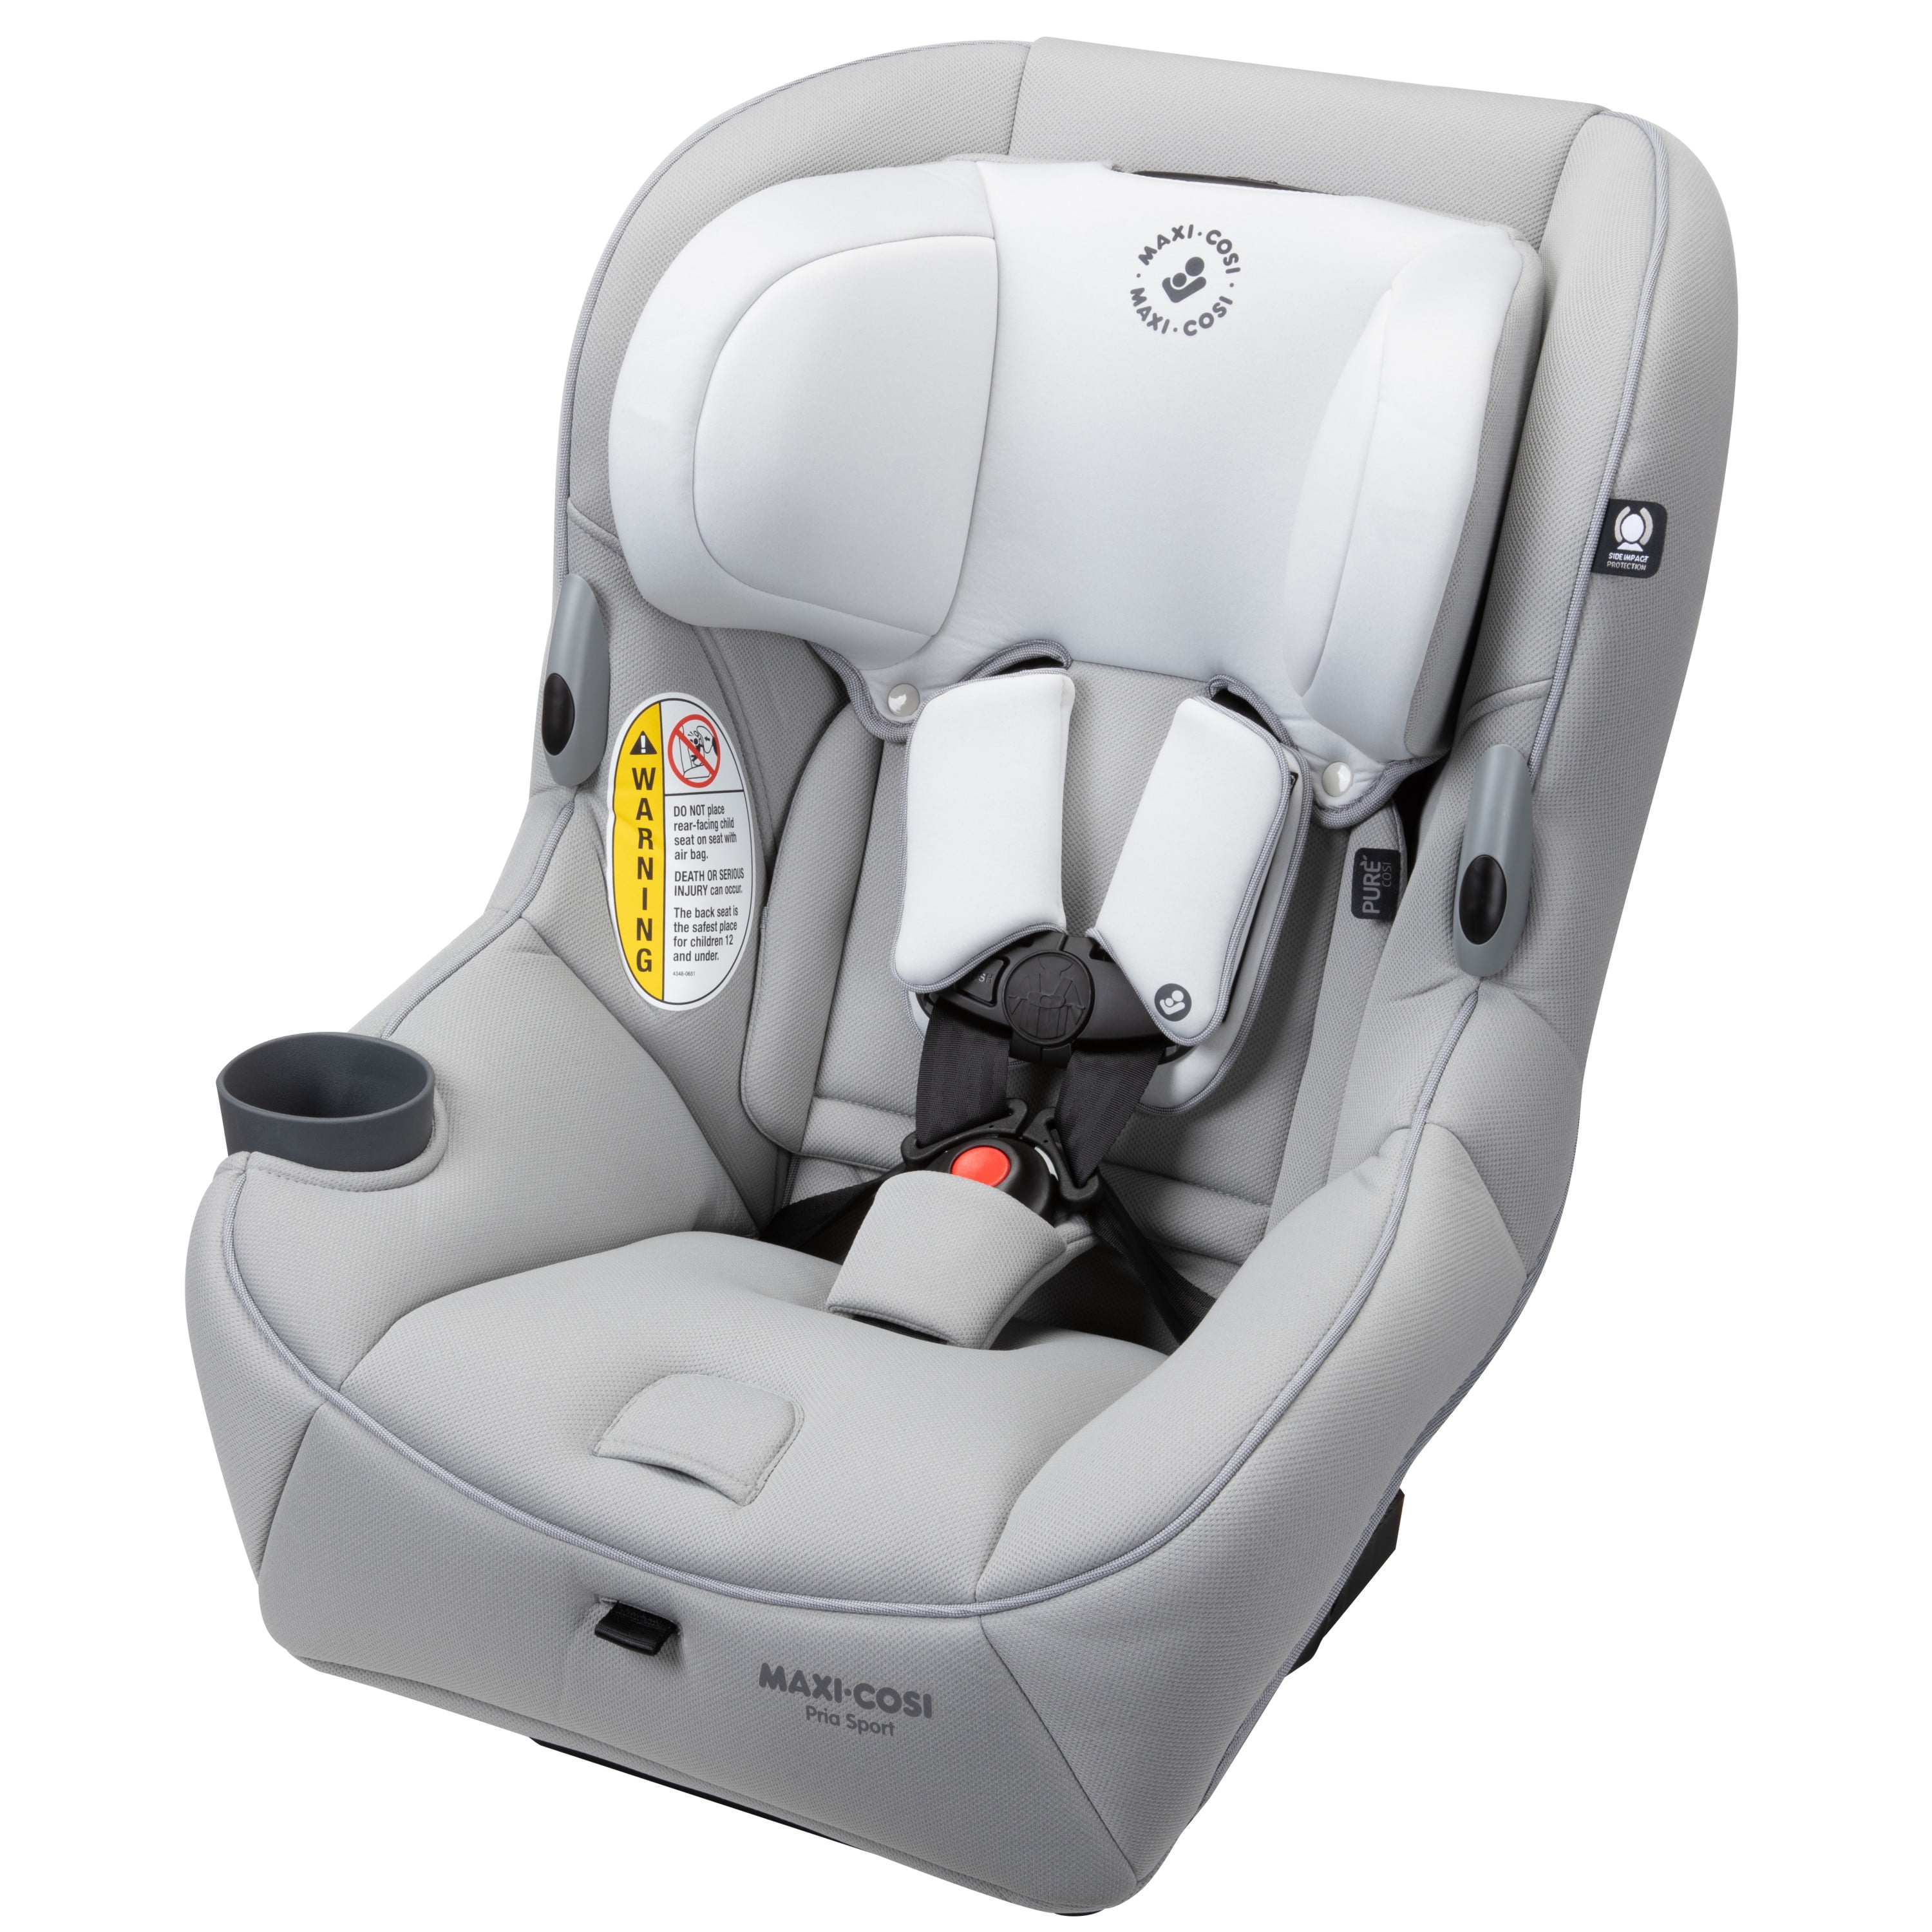 S car seat Maxi-Cosi Replacement Seat Cover fits Maxi Cosi PEBBLE 0 